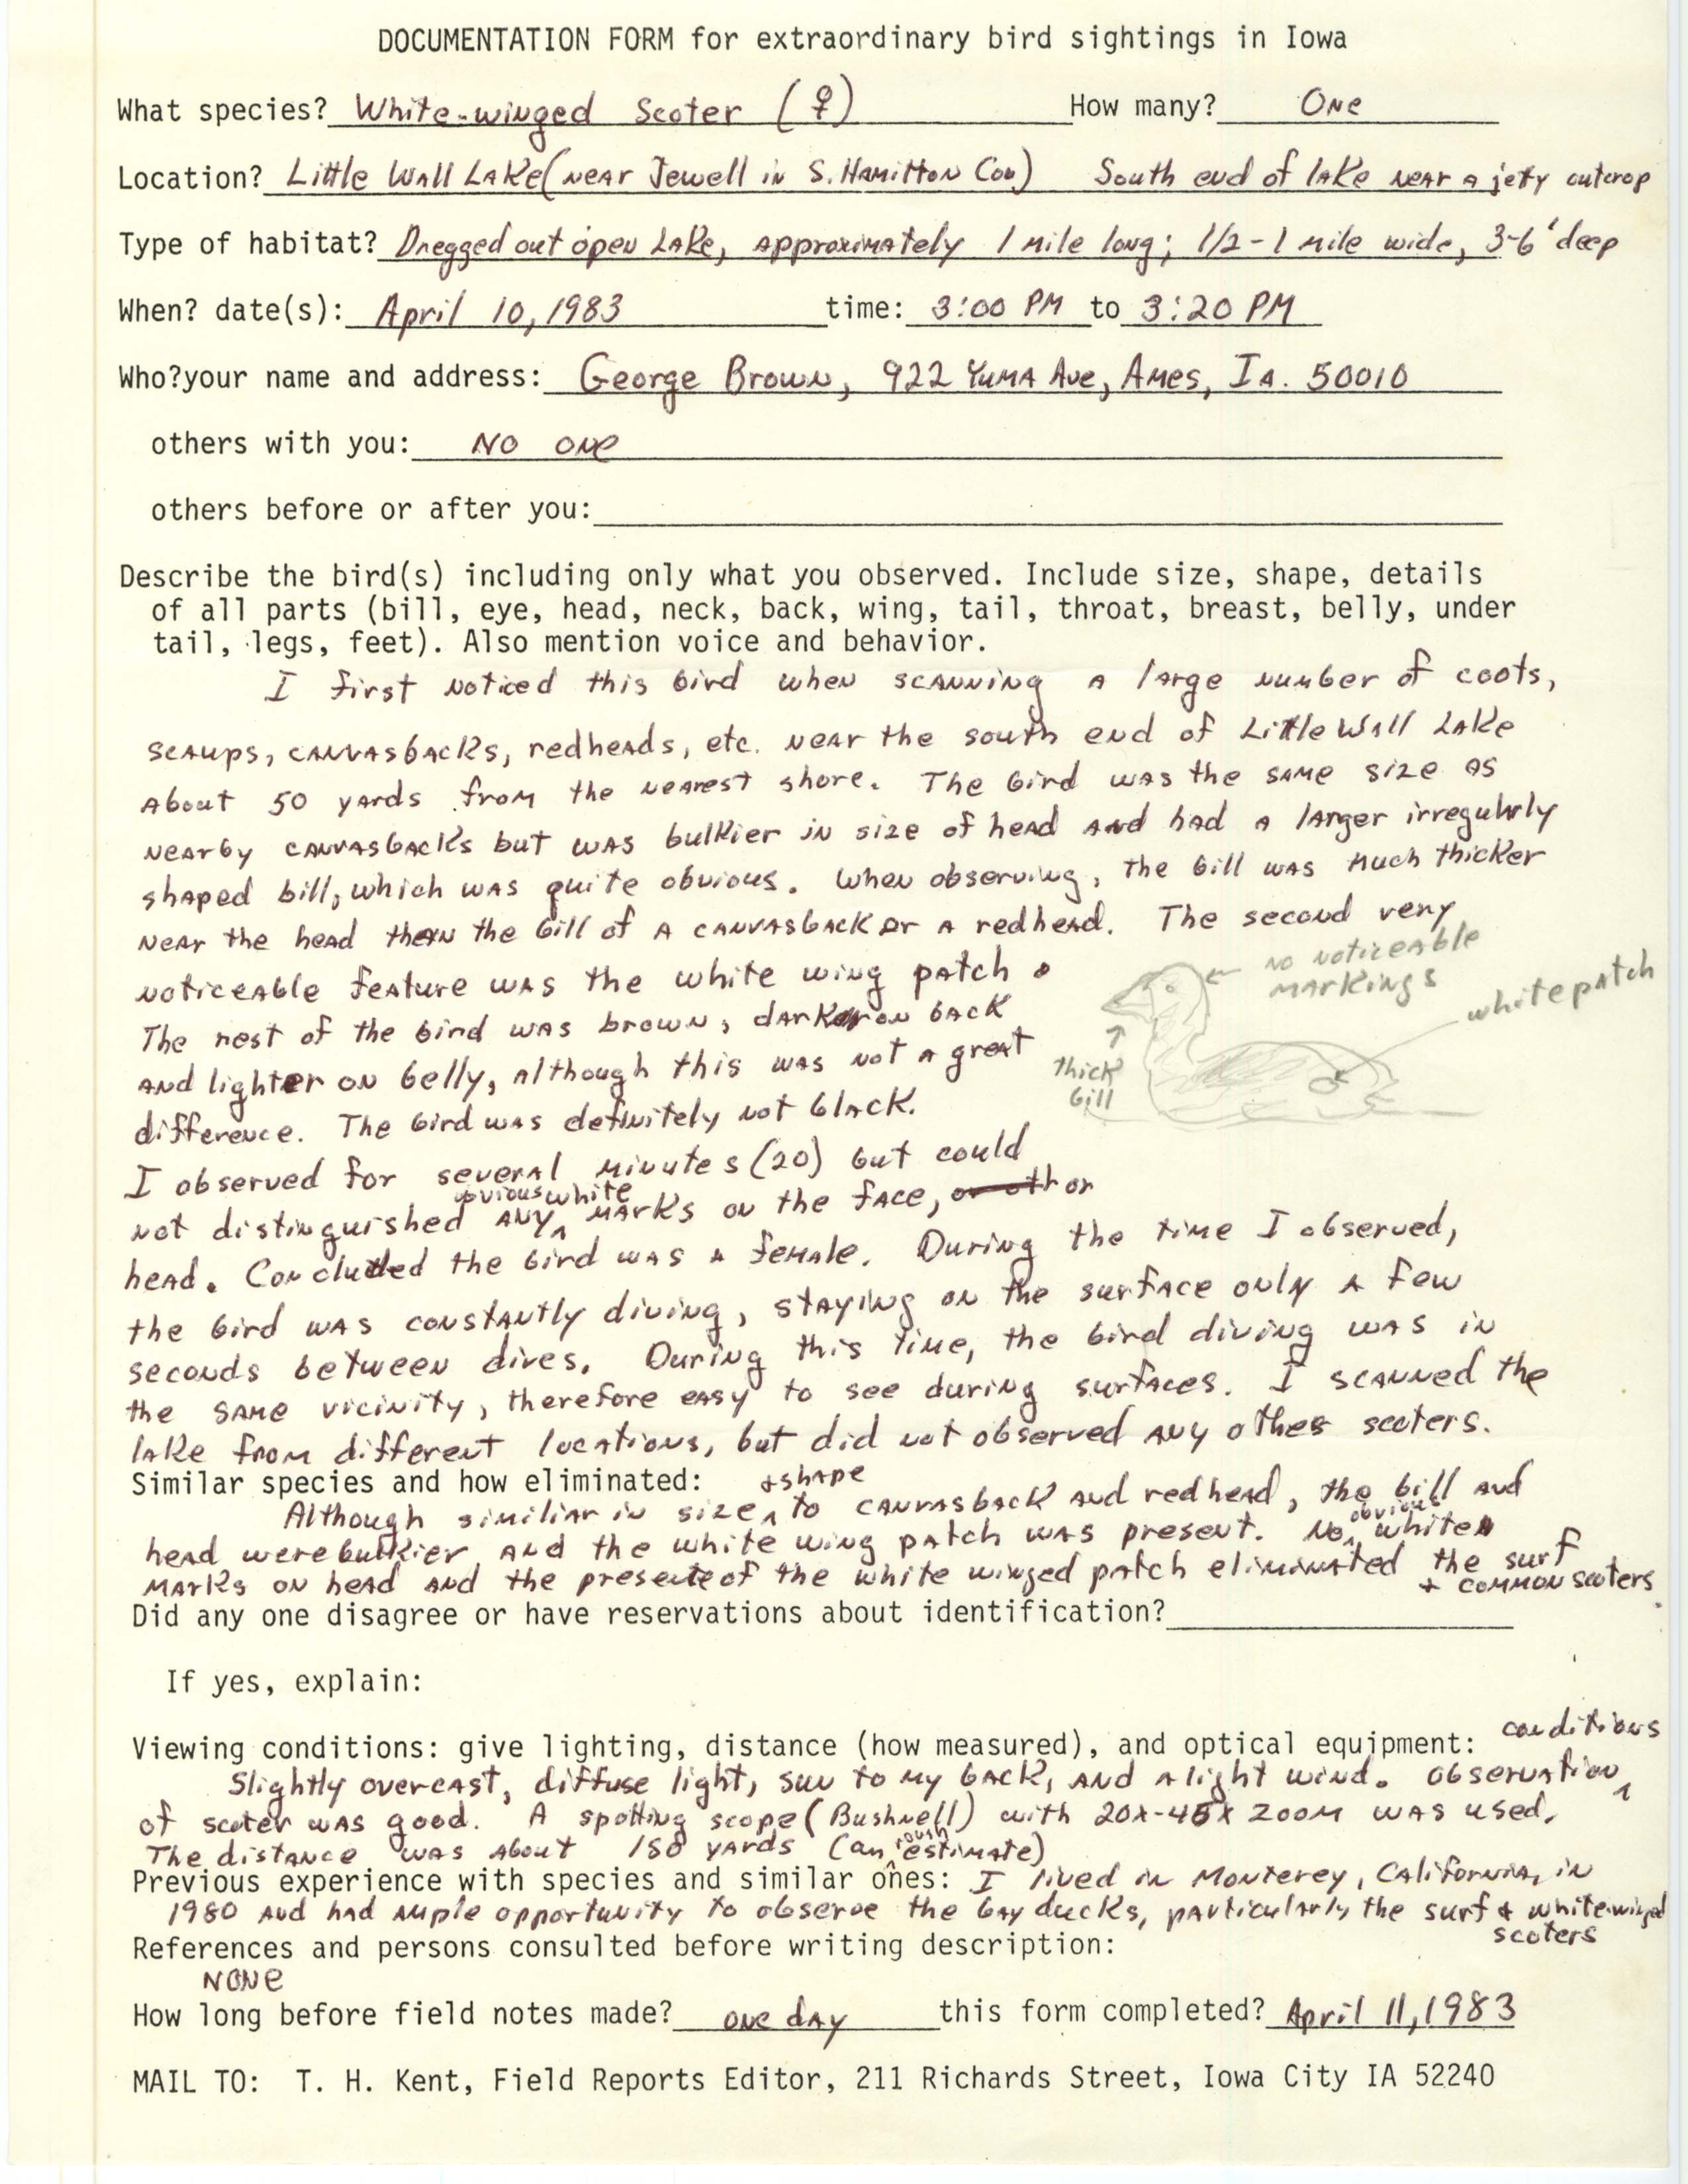 Rare bird documentation form for White-winged Scoter at Little Wall Lake, 1983